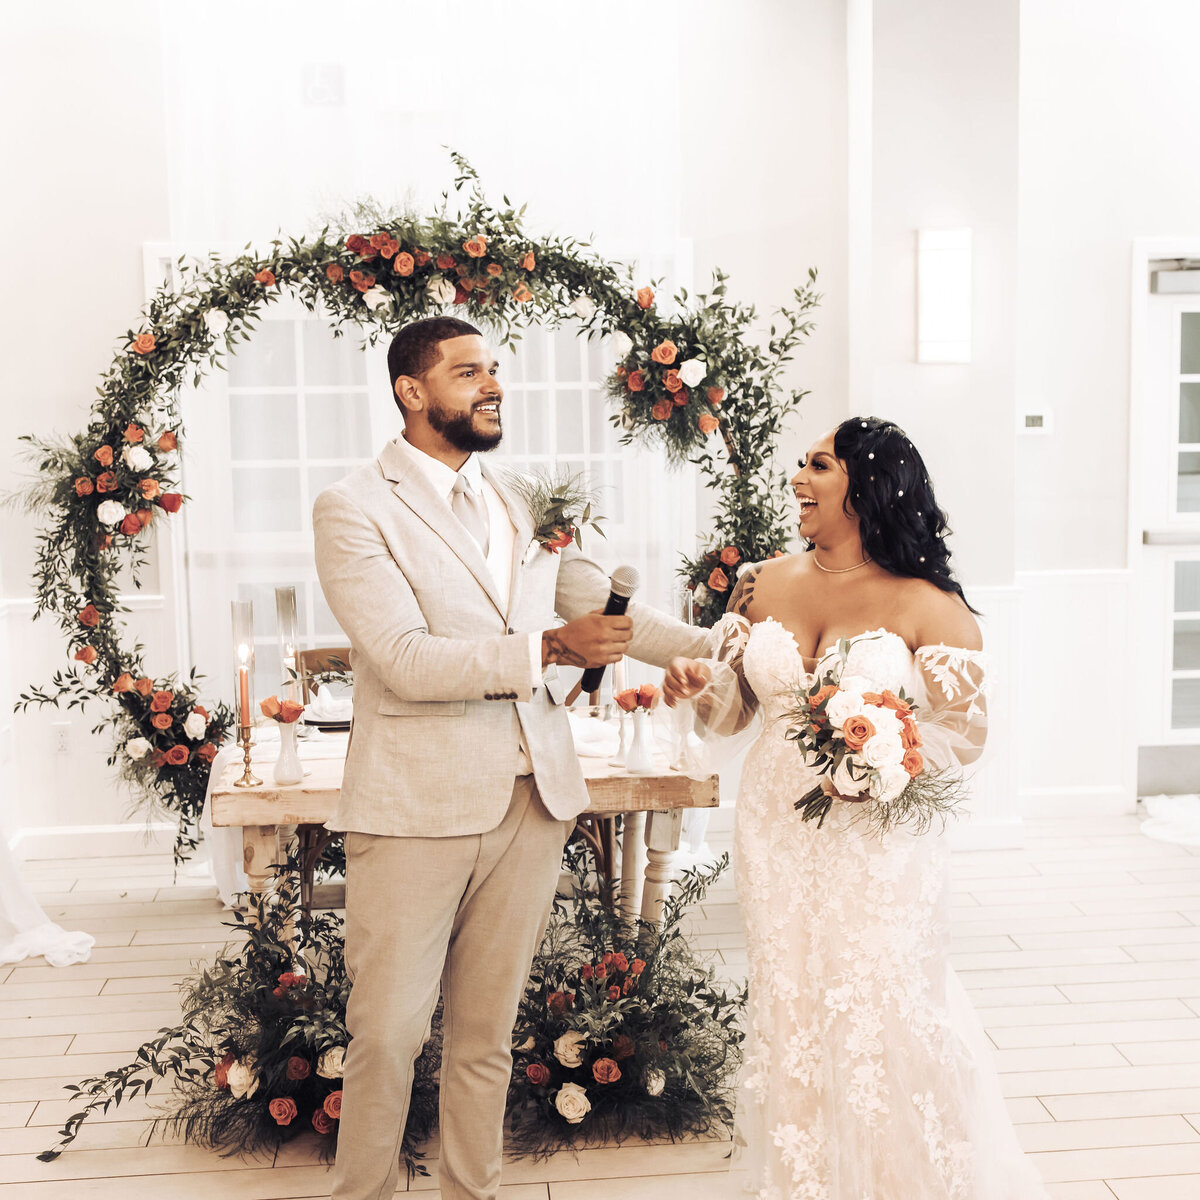 bride and groom standing in front of reception table that is decorated with orange and white roses